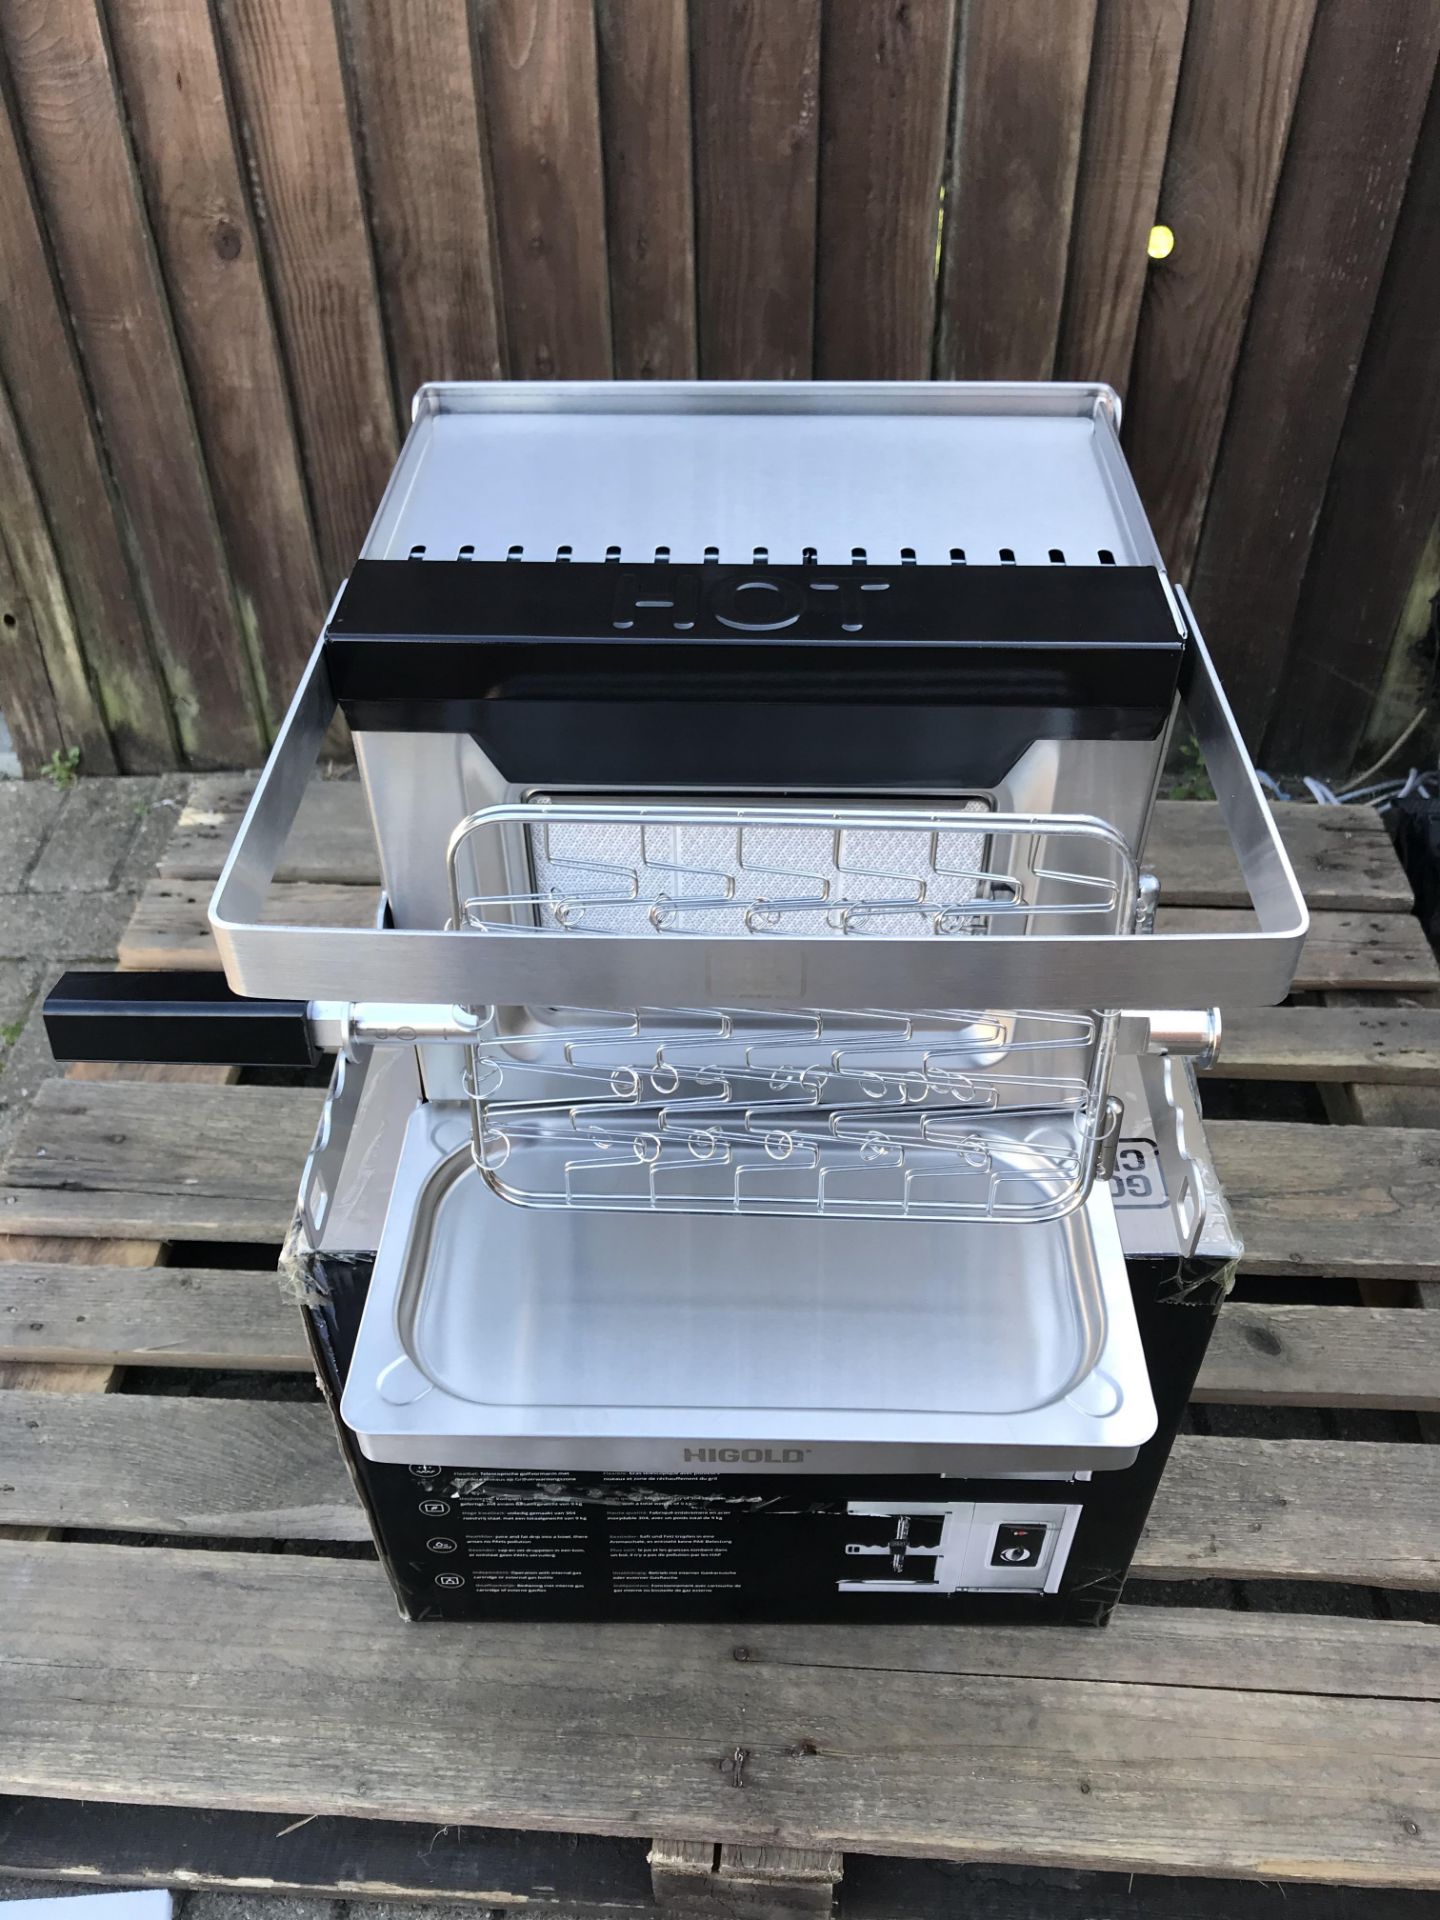 GOLD CHEF TWO 800C ROTISSERIE GRILL - Image 6 of 6